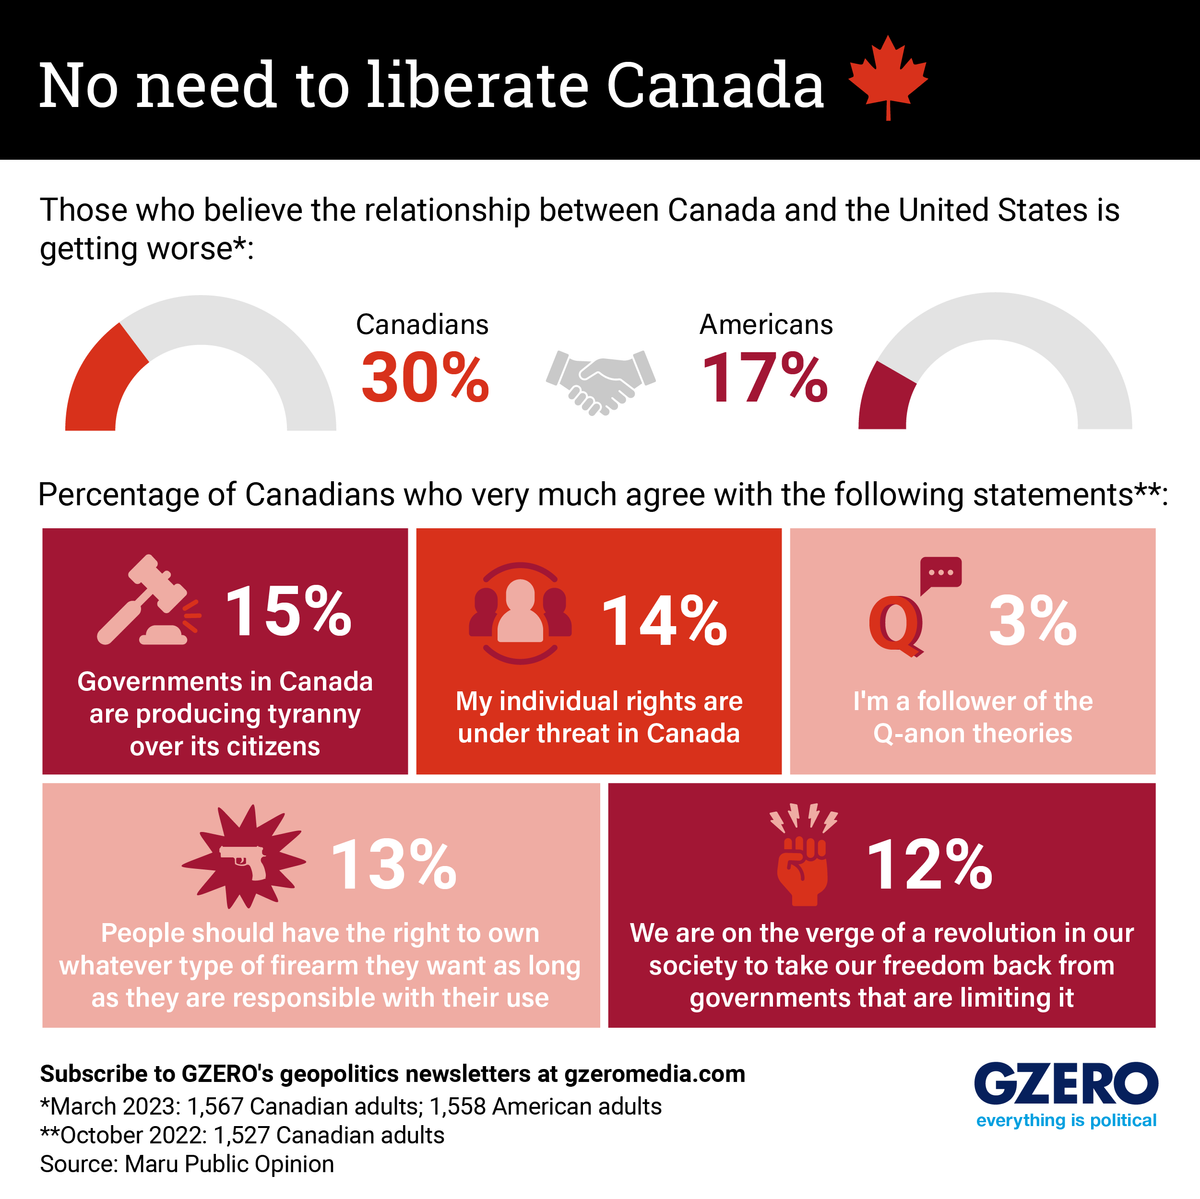 The Graphic Truth: No need to liberate Canada